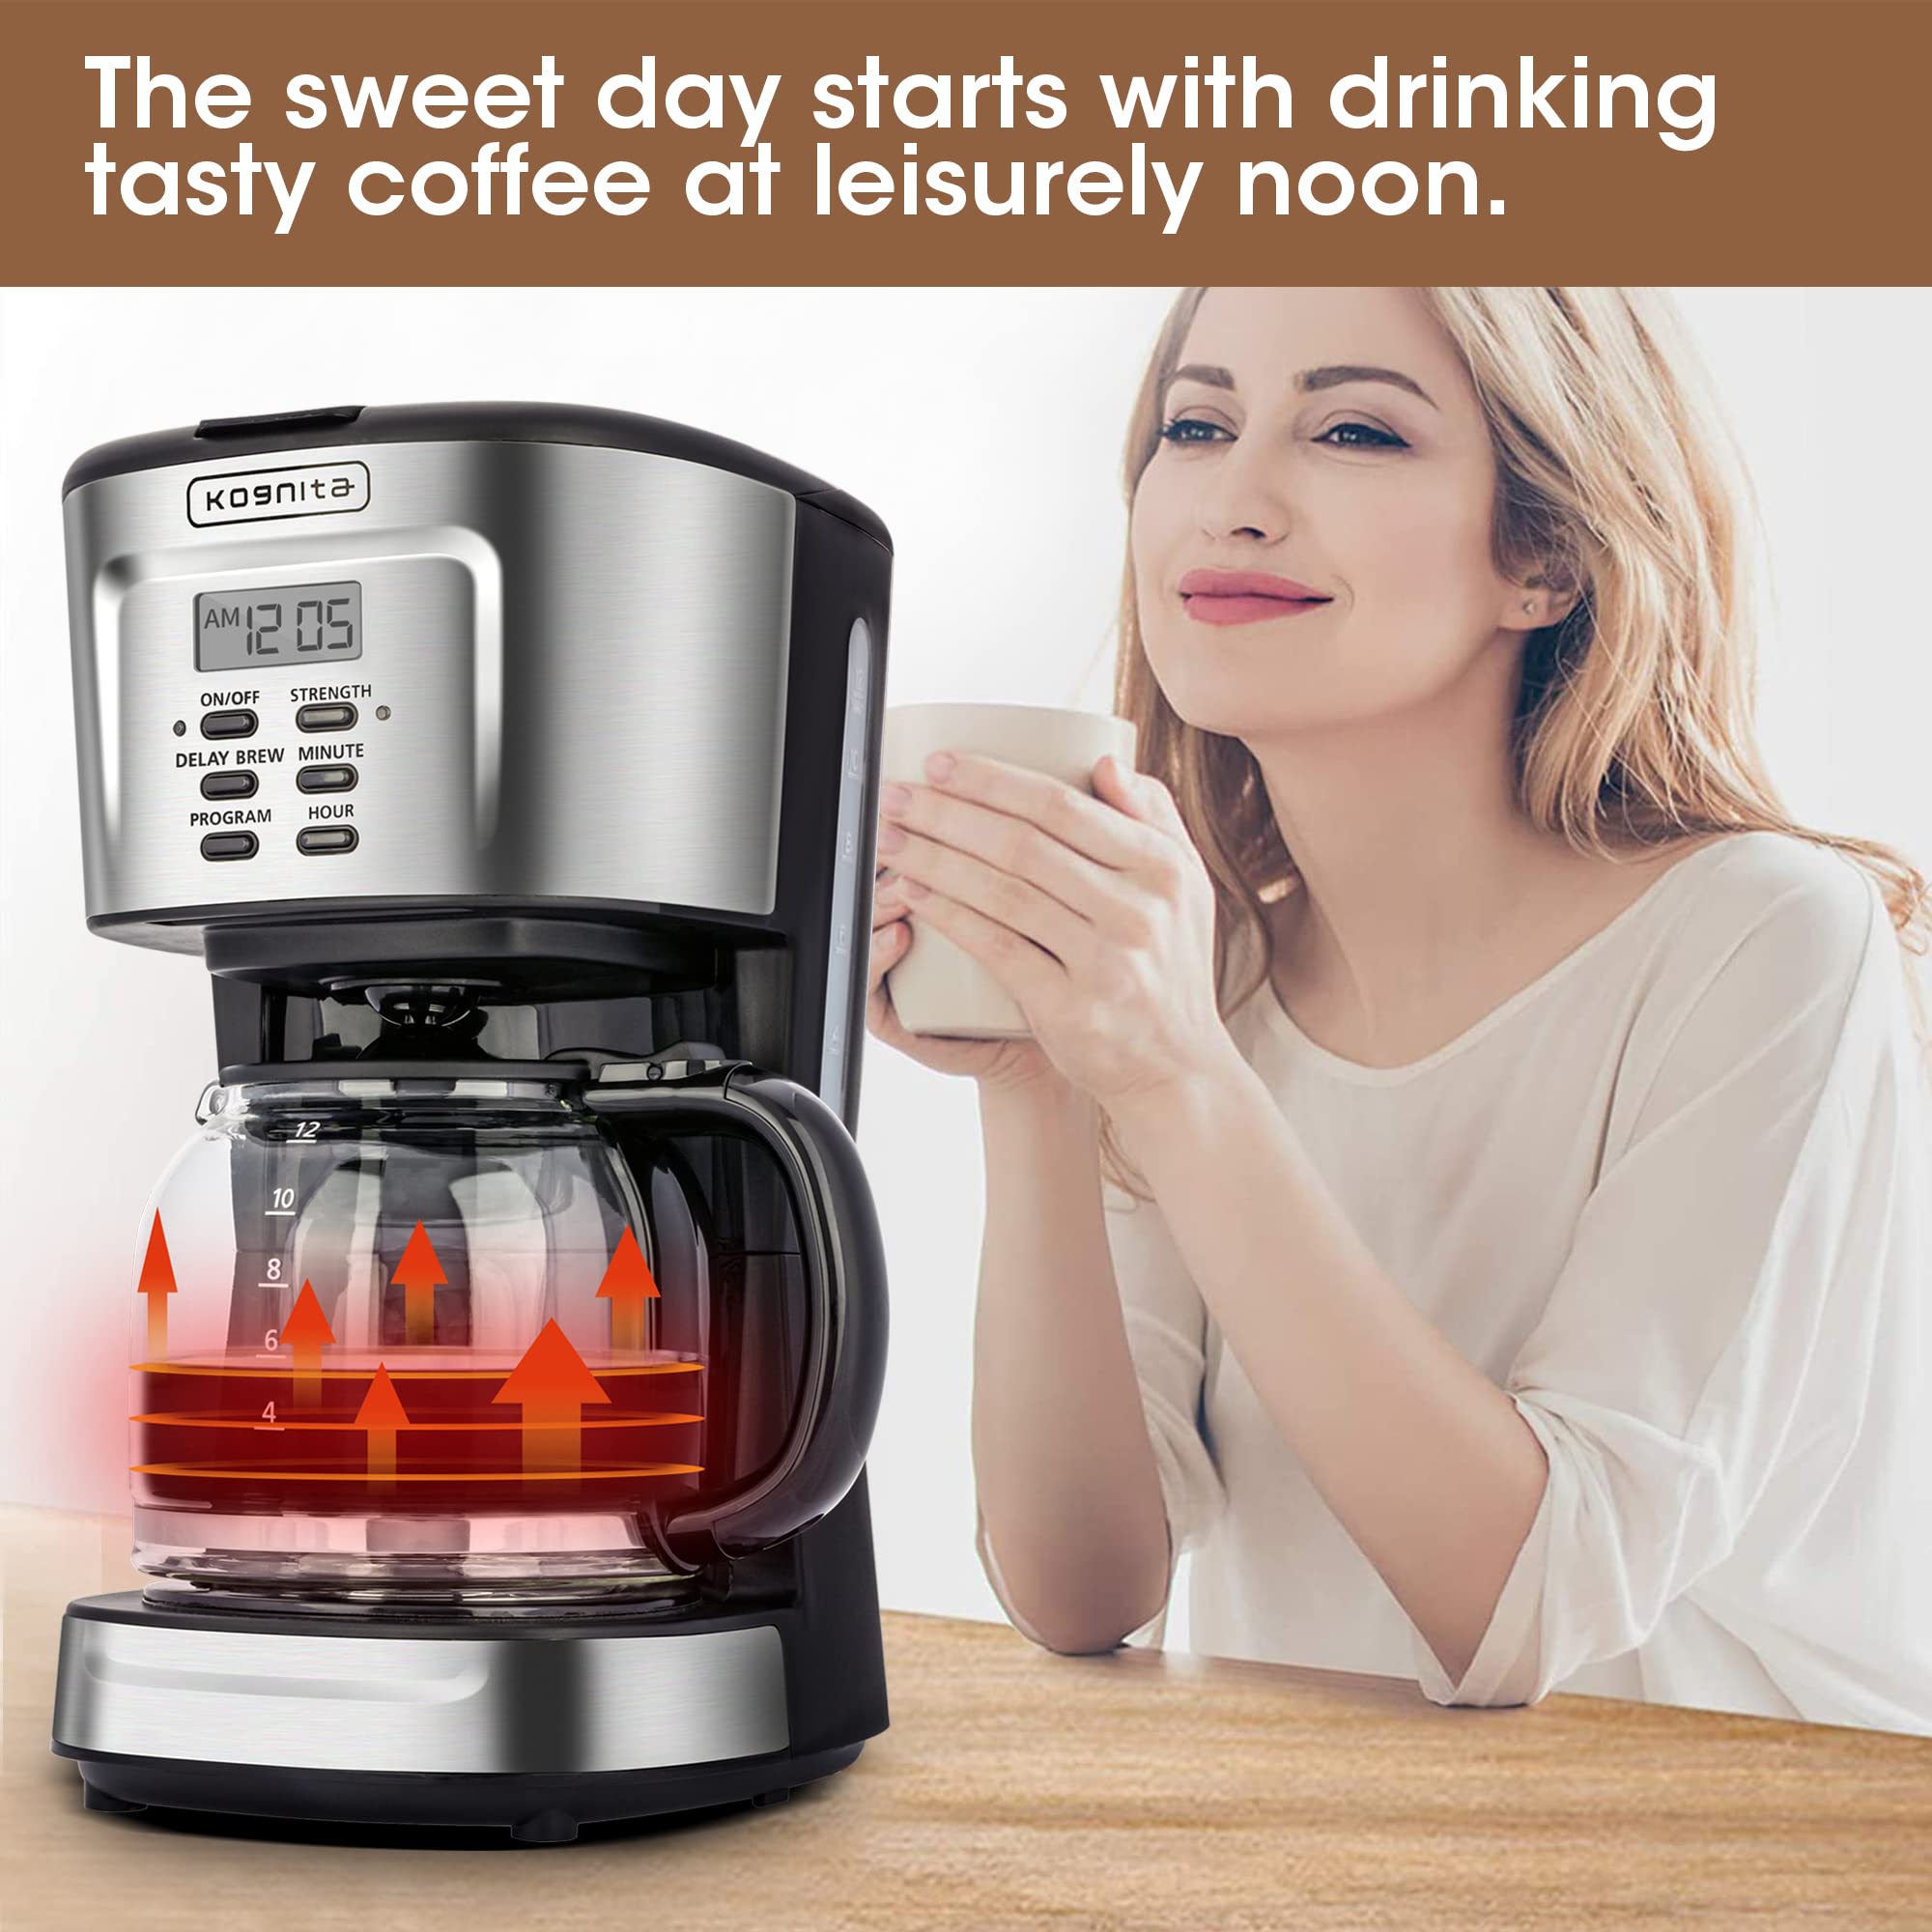 Kognita 12 Cup Coffee Maker, Programmable Small Coffee Maker with Glass Carafe and Filter, Dirp Coffee Maker Coffee Pot Machine, Keep Warm, Brew Strength Control, 900W Fast Brew Auto Shut Off, Stainless Steel